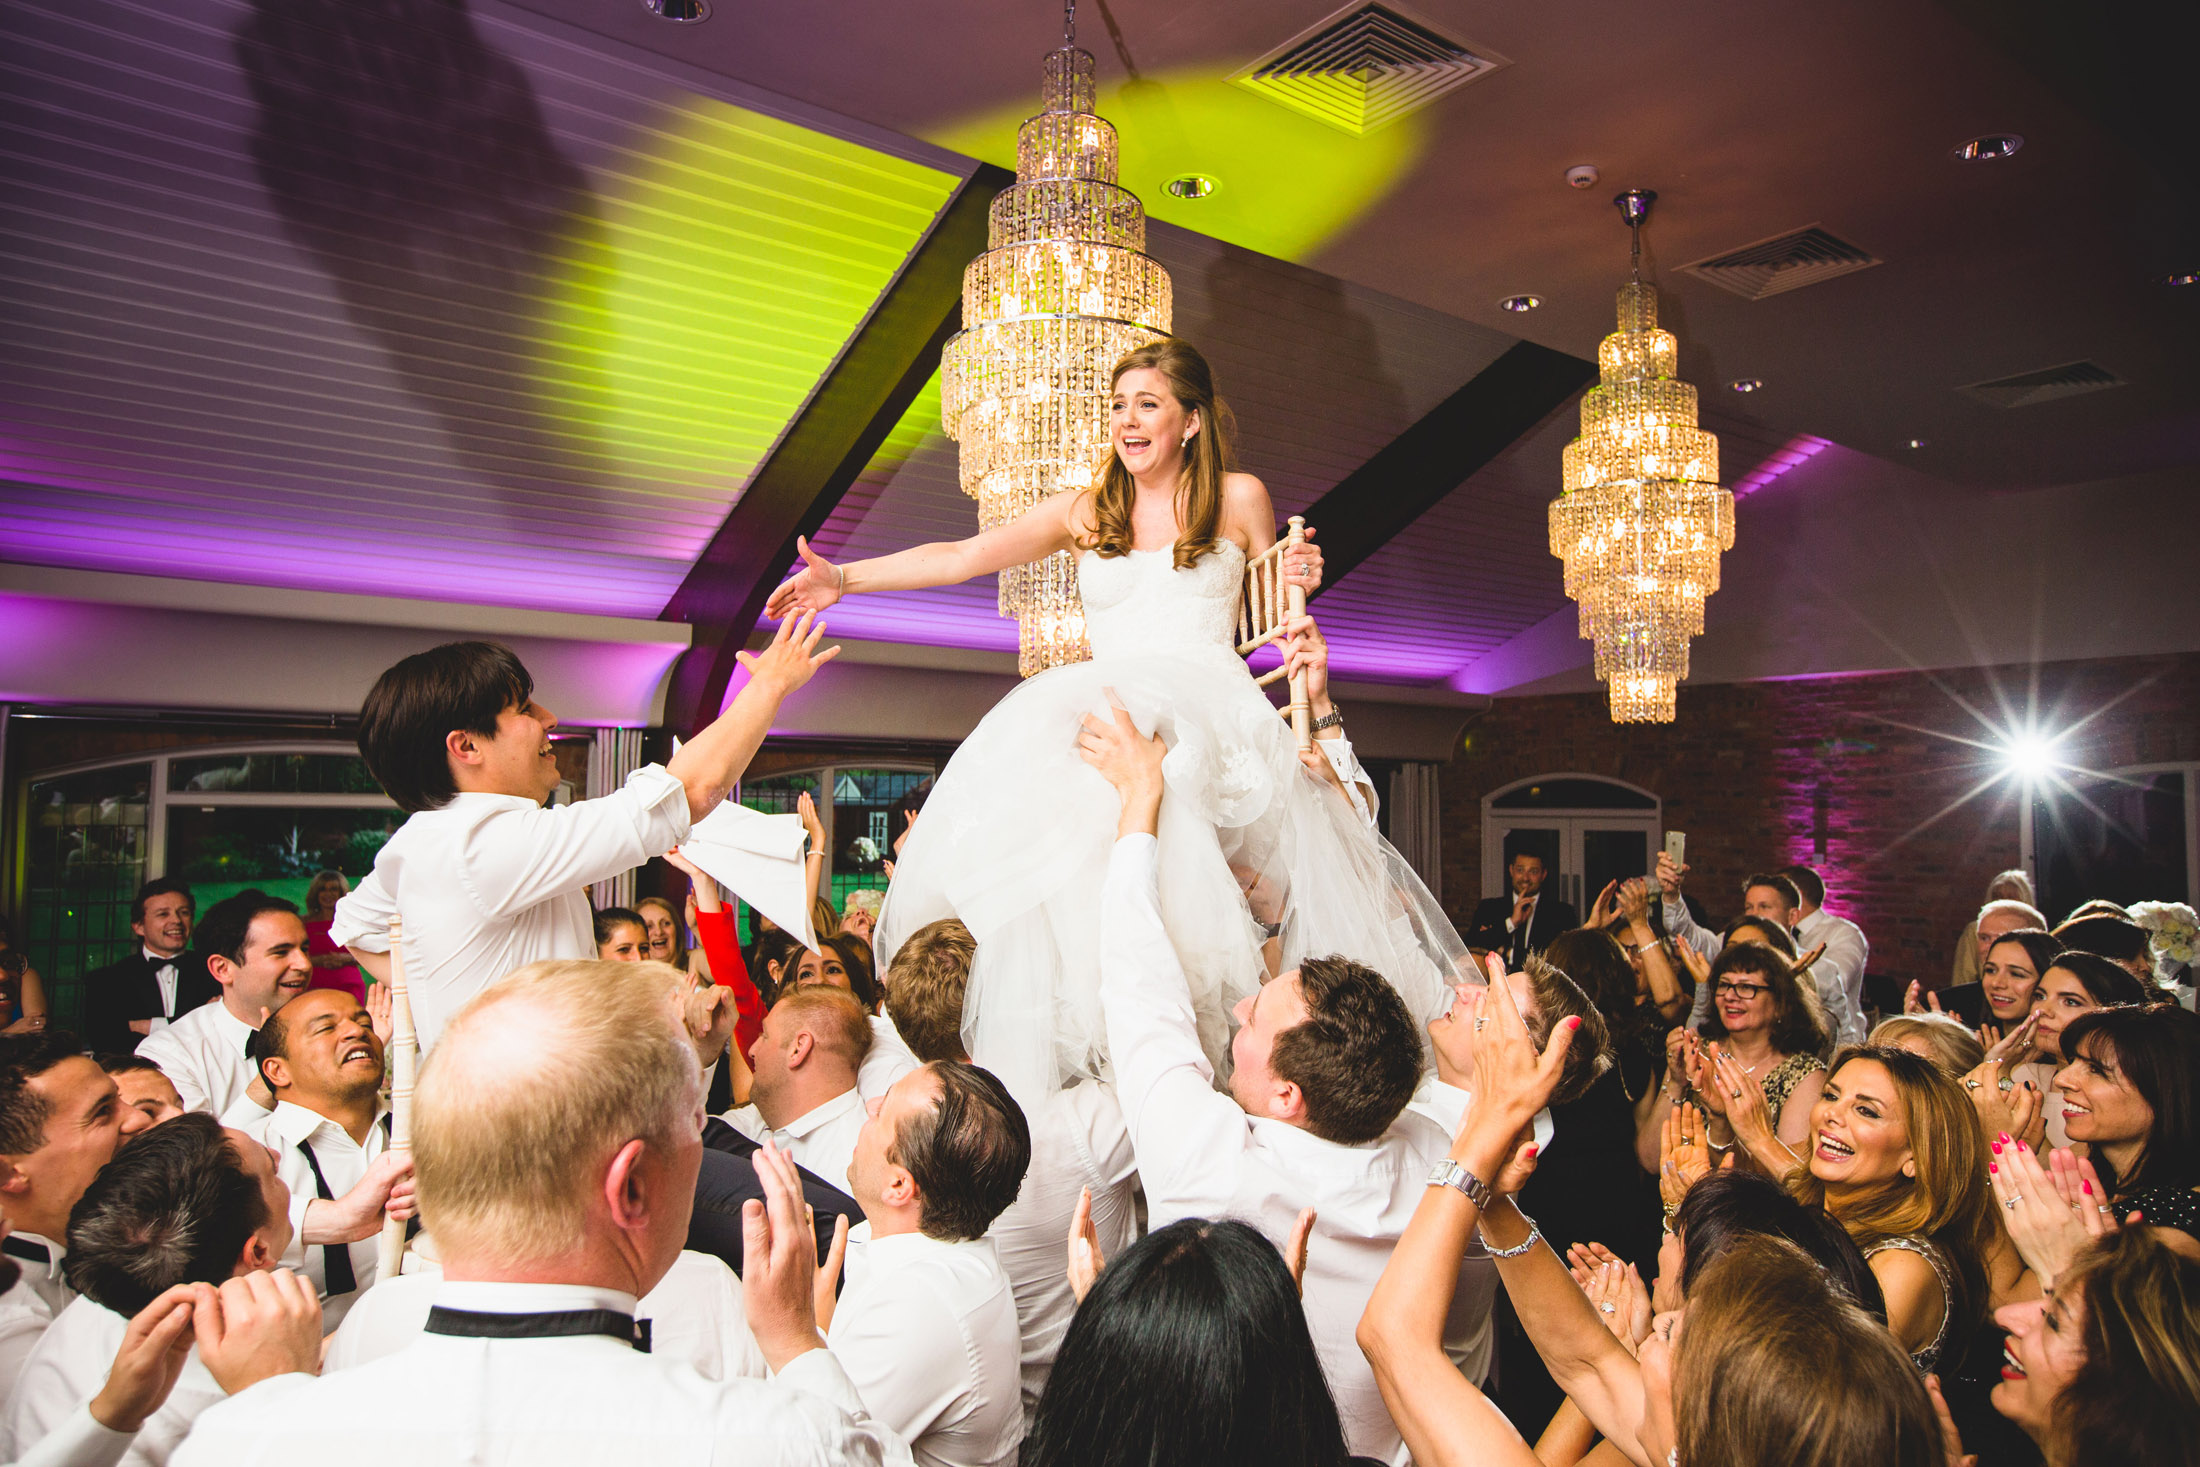 jewish wedding photography - dancing on chairs lifted up